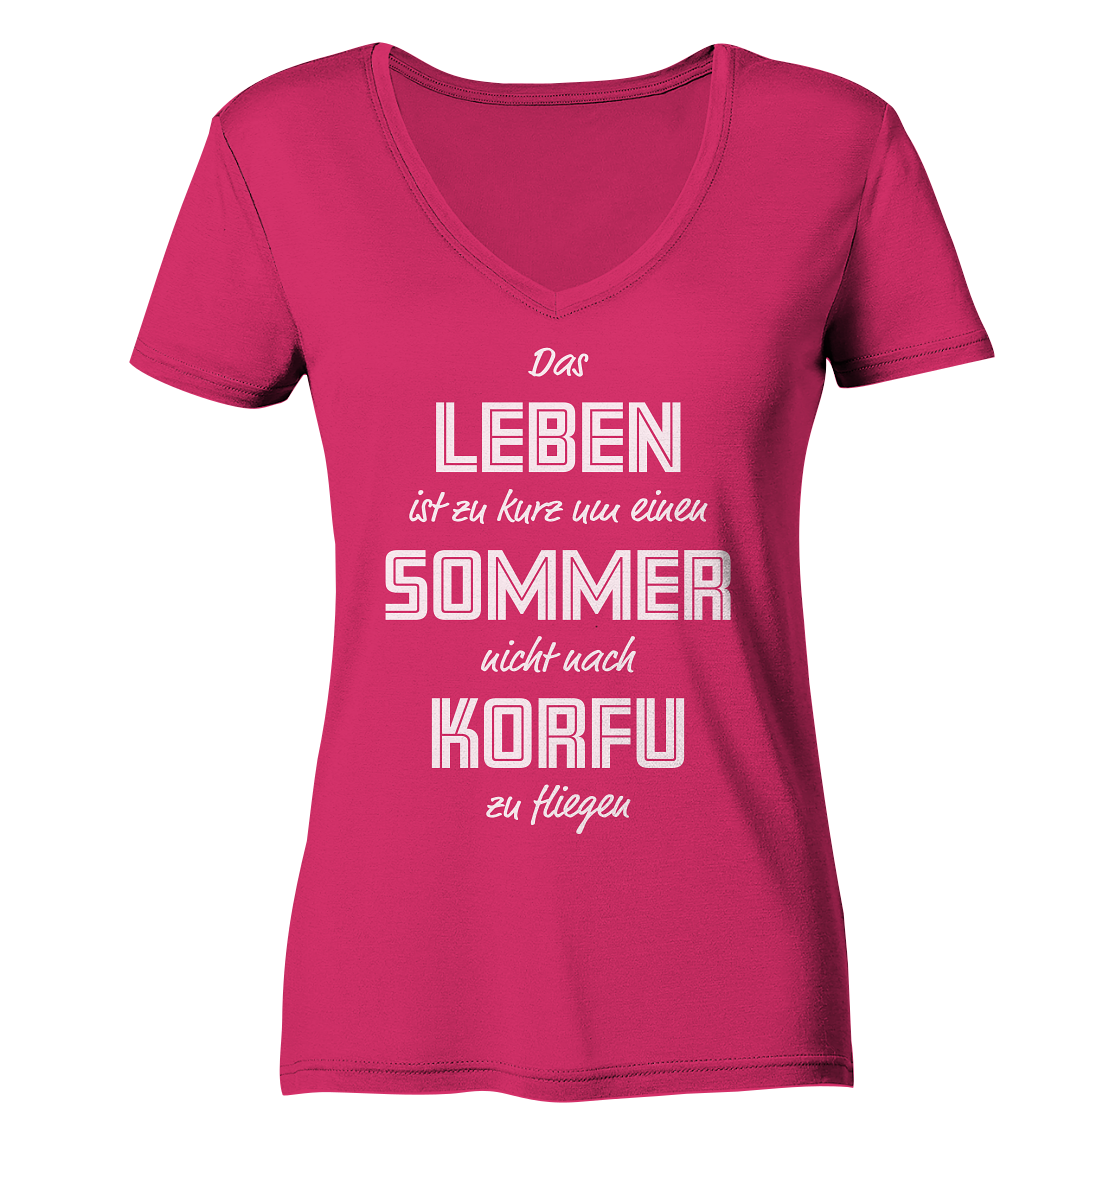 Life is too short not to fly to Corfu one summer - Ladies Organic V-Neck Shirt